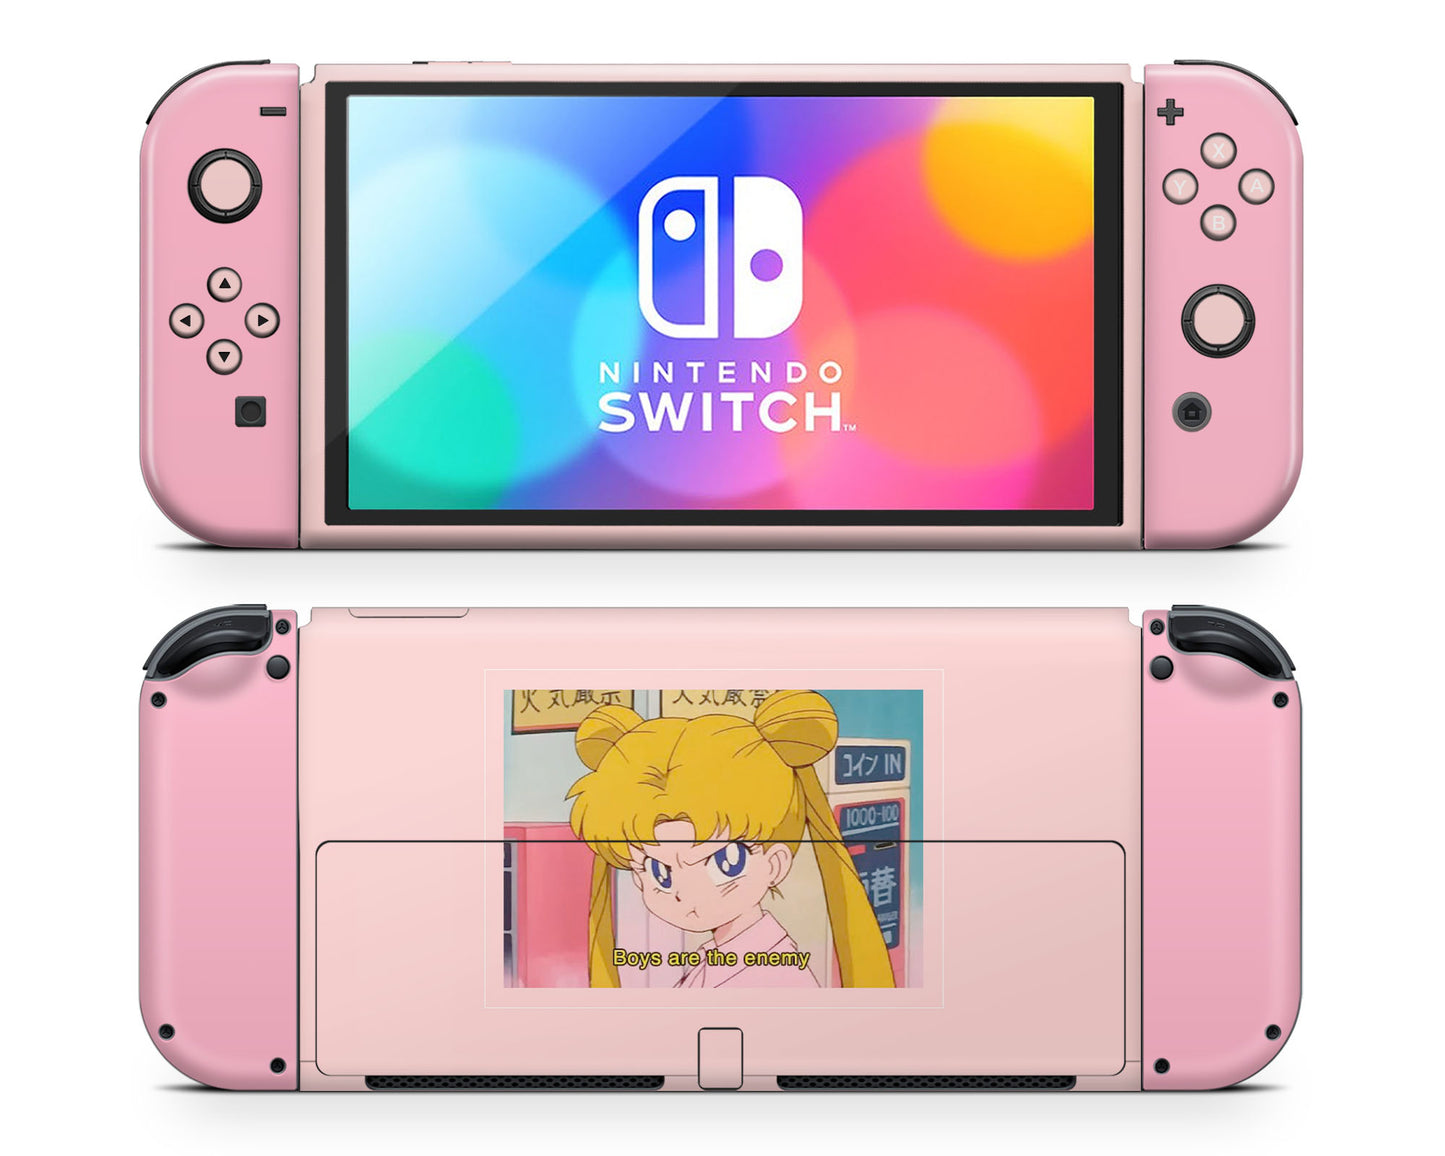 Sailor Moon Boys Are the Enemy Nintendo Switch OLED Skin